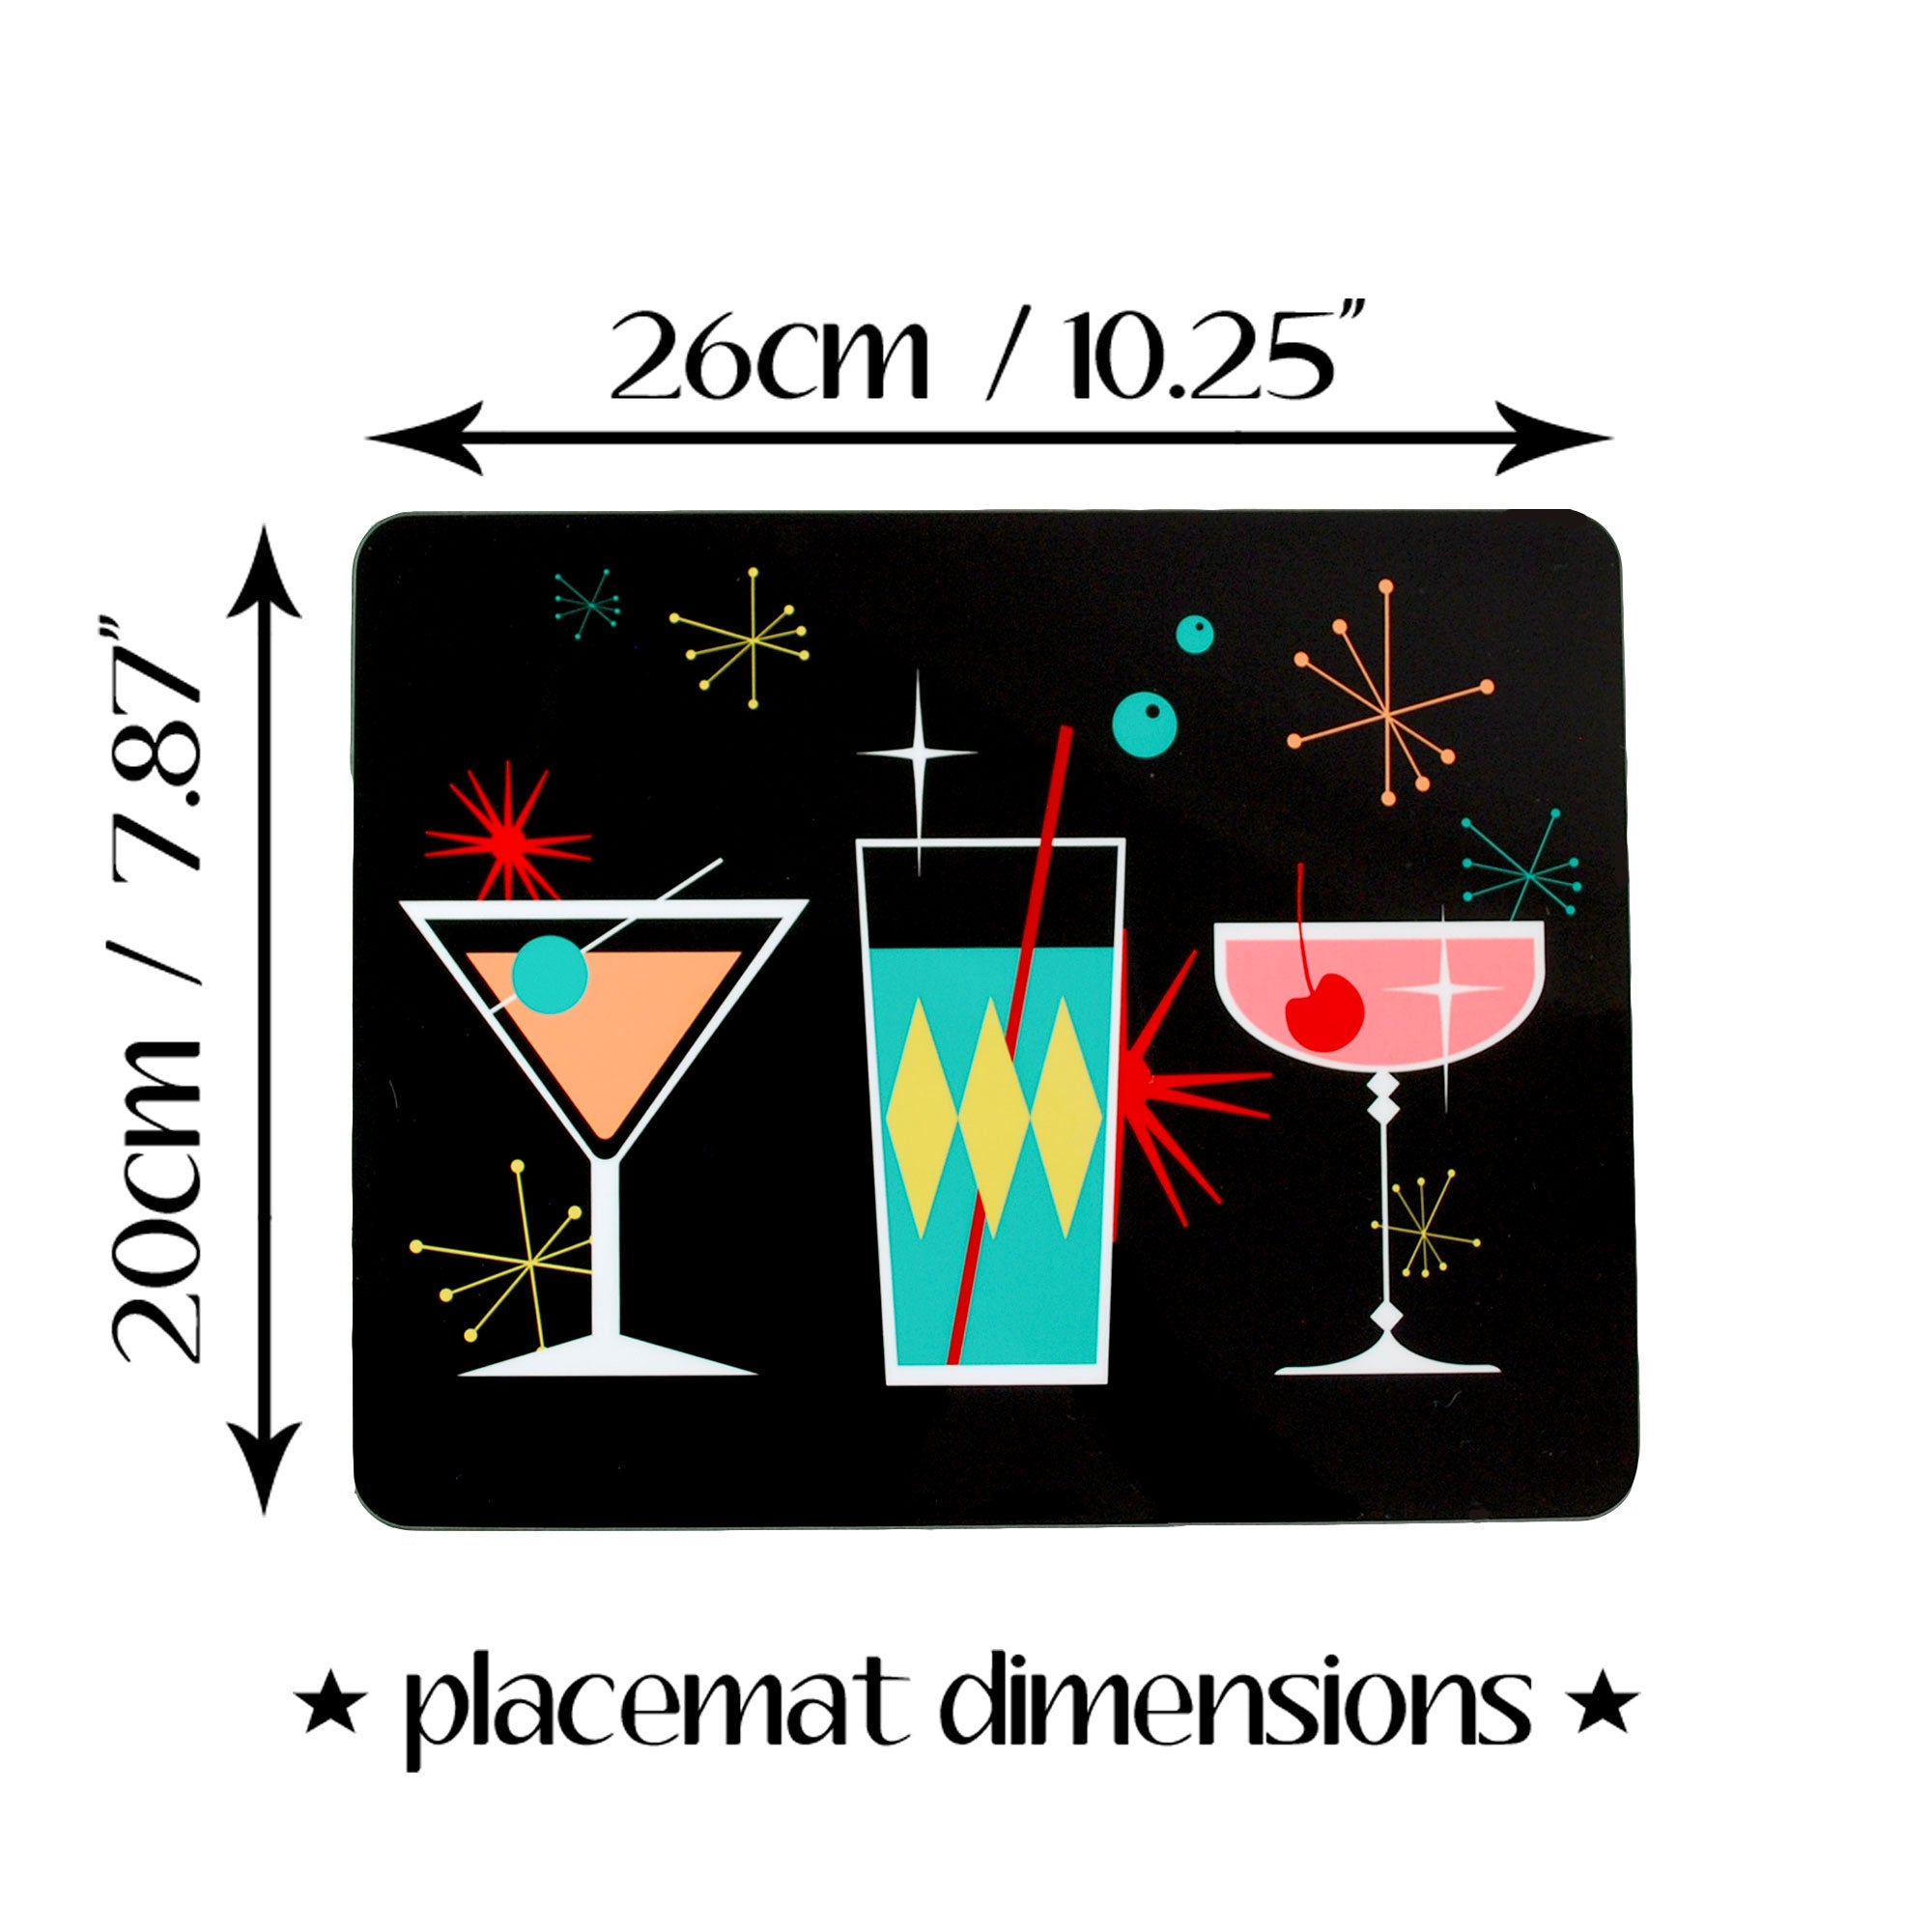 Cosmic Cocktail Placemat info graphic showing placemat dimensions | The Inkabilly Emporium